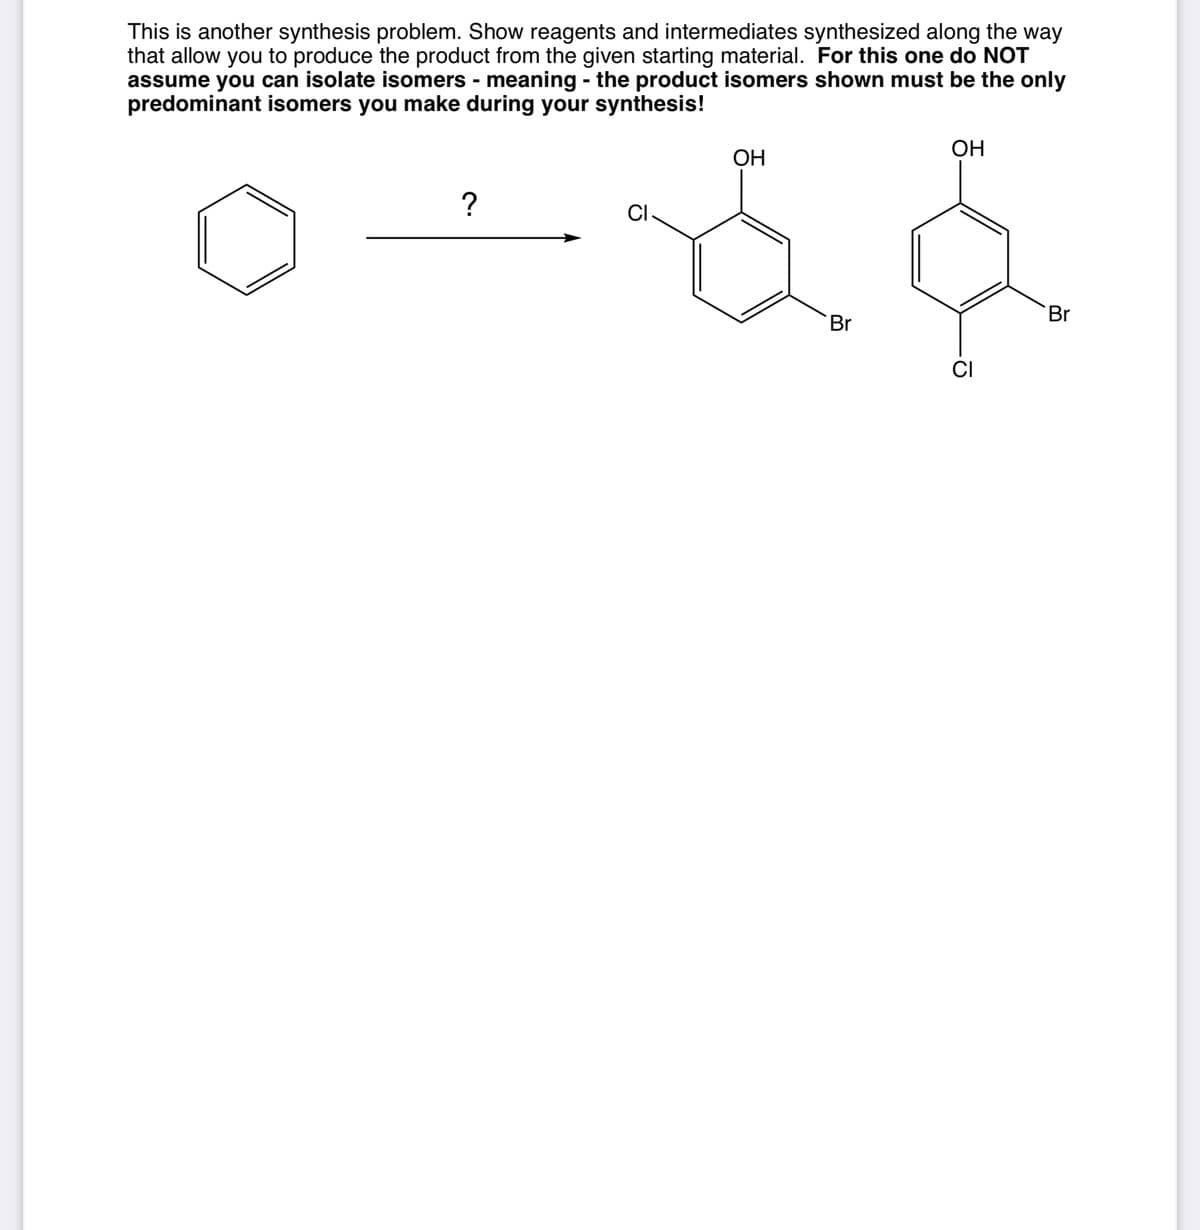 OH
This is another synthesis problem. Show reagents and intermediates synthesized along the way
that allow you to produce the product from the given starting material. For this one do NOT
assume you can isolate isomers - meaning - the product isomers shown must be the only
predominant isomers you make during your synthesis!
OH
?
CI-
Br
CI
ठ
Br